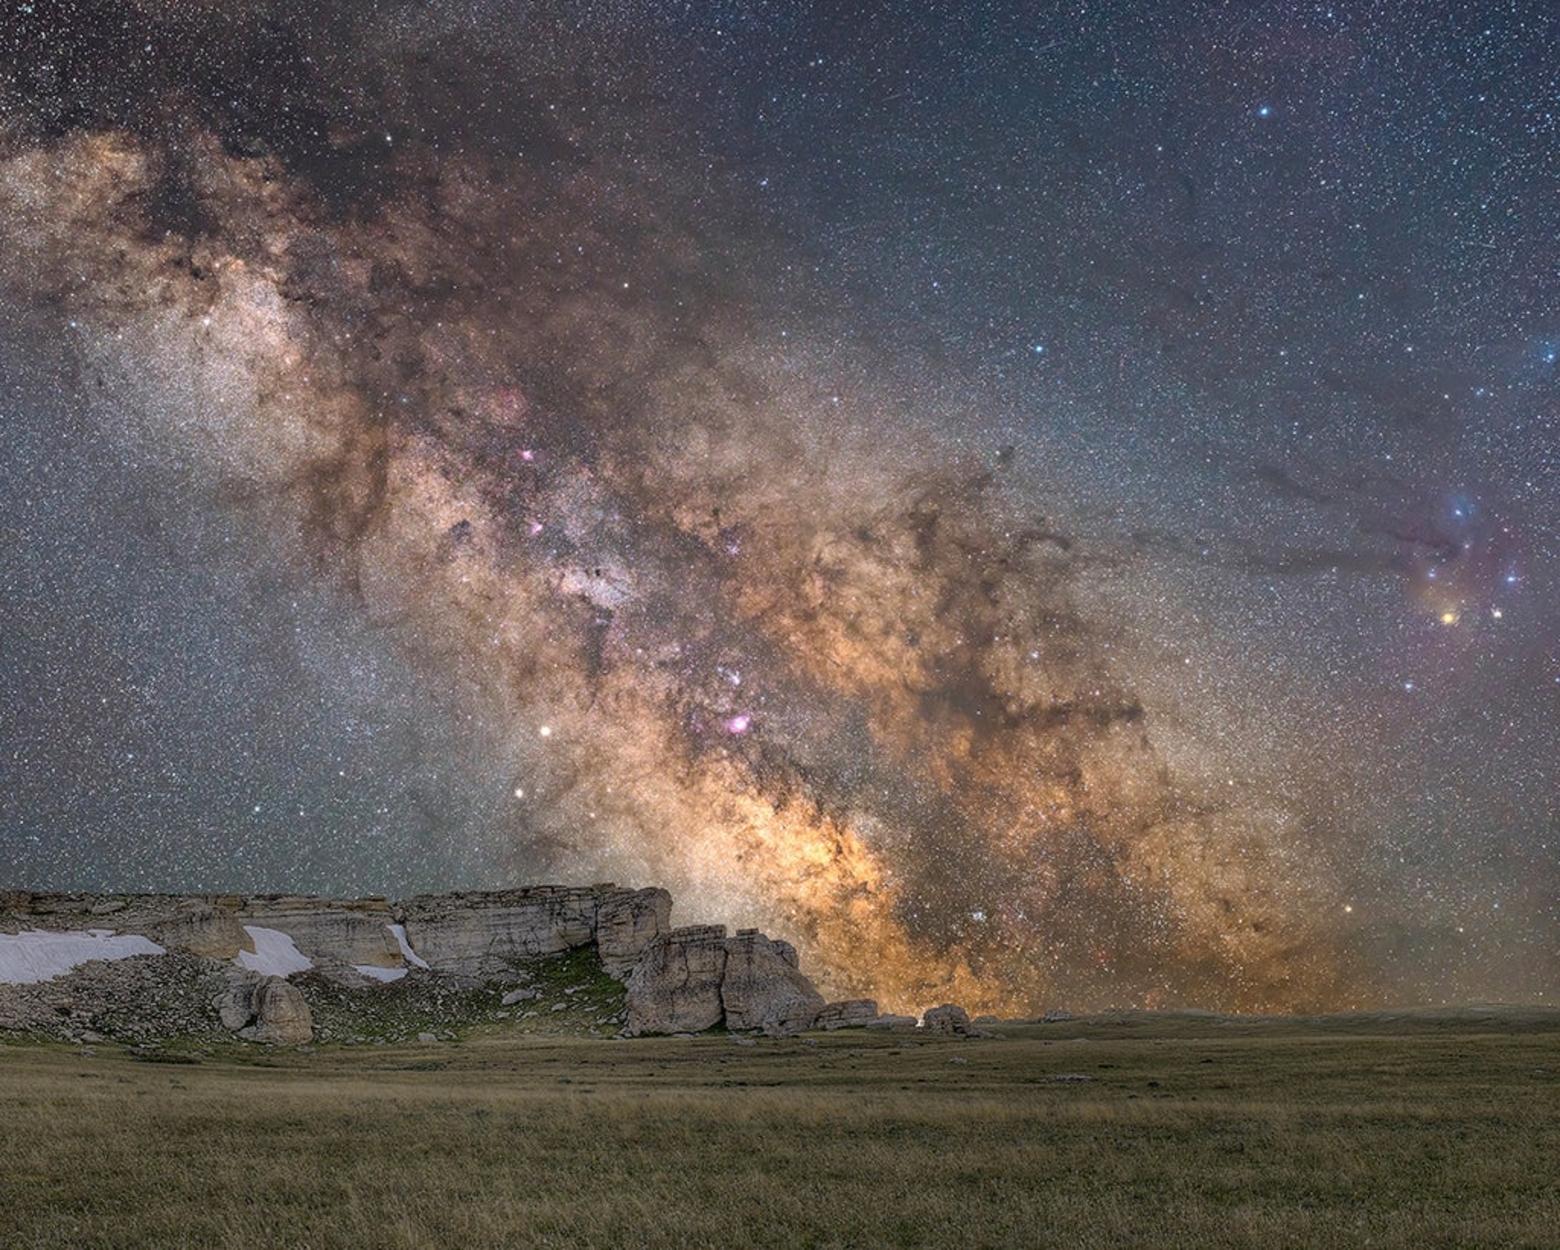 "Buffalo Jump Into Eternity," a photograph by Jake Mosher. To see more of Mosher's amazing work go to jakemosher.com